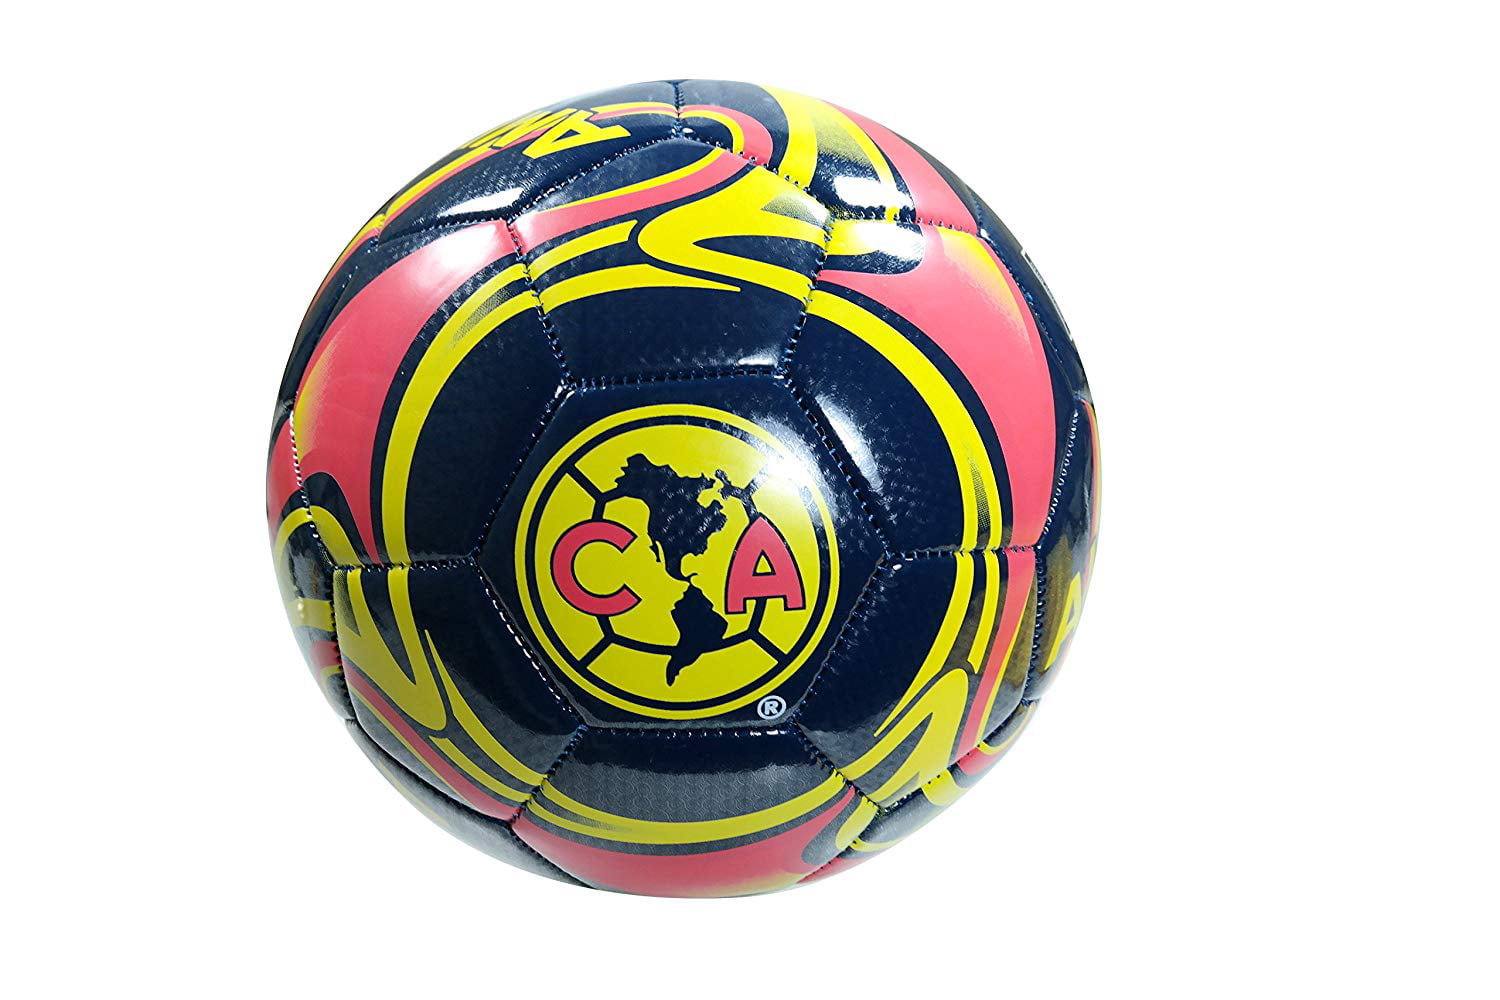 Club America Authentic Official Licensed Soccer Ball Size 4-05-4 